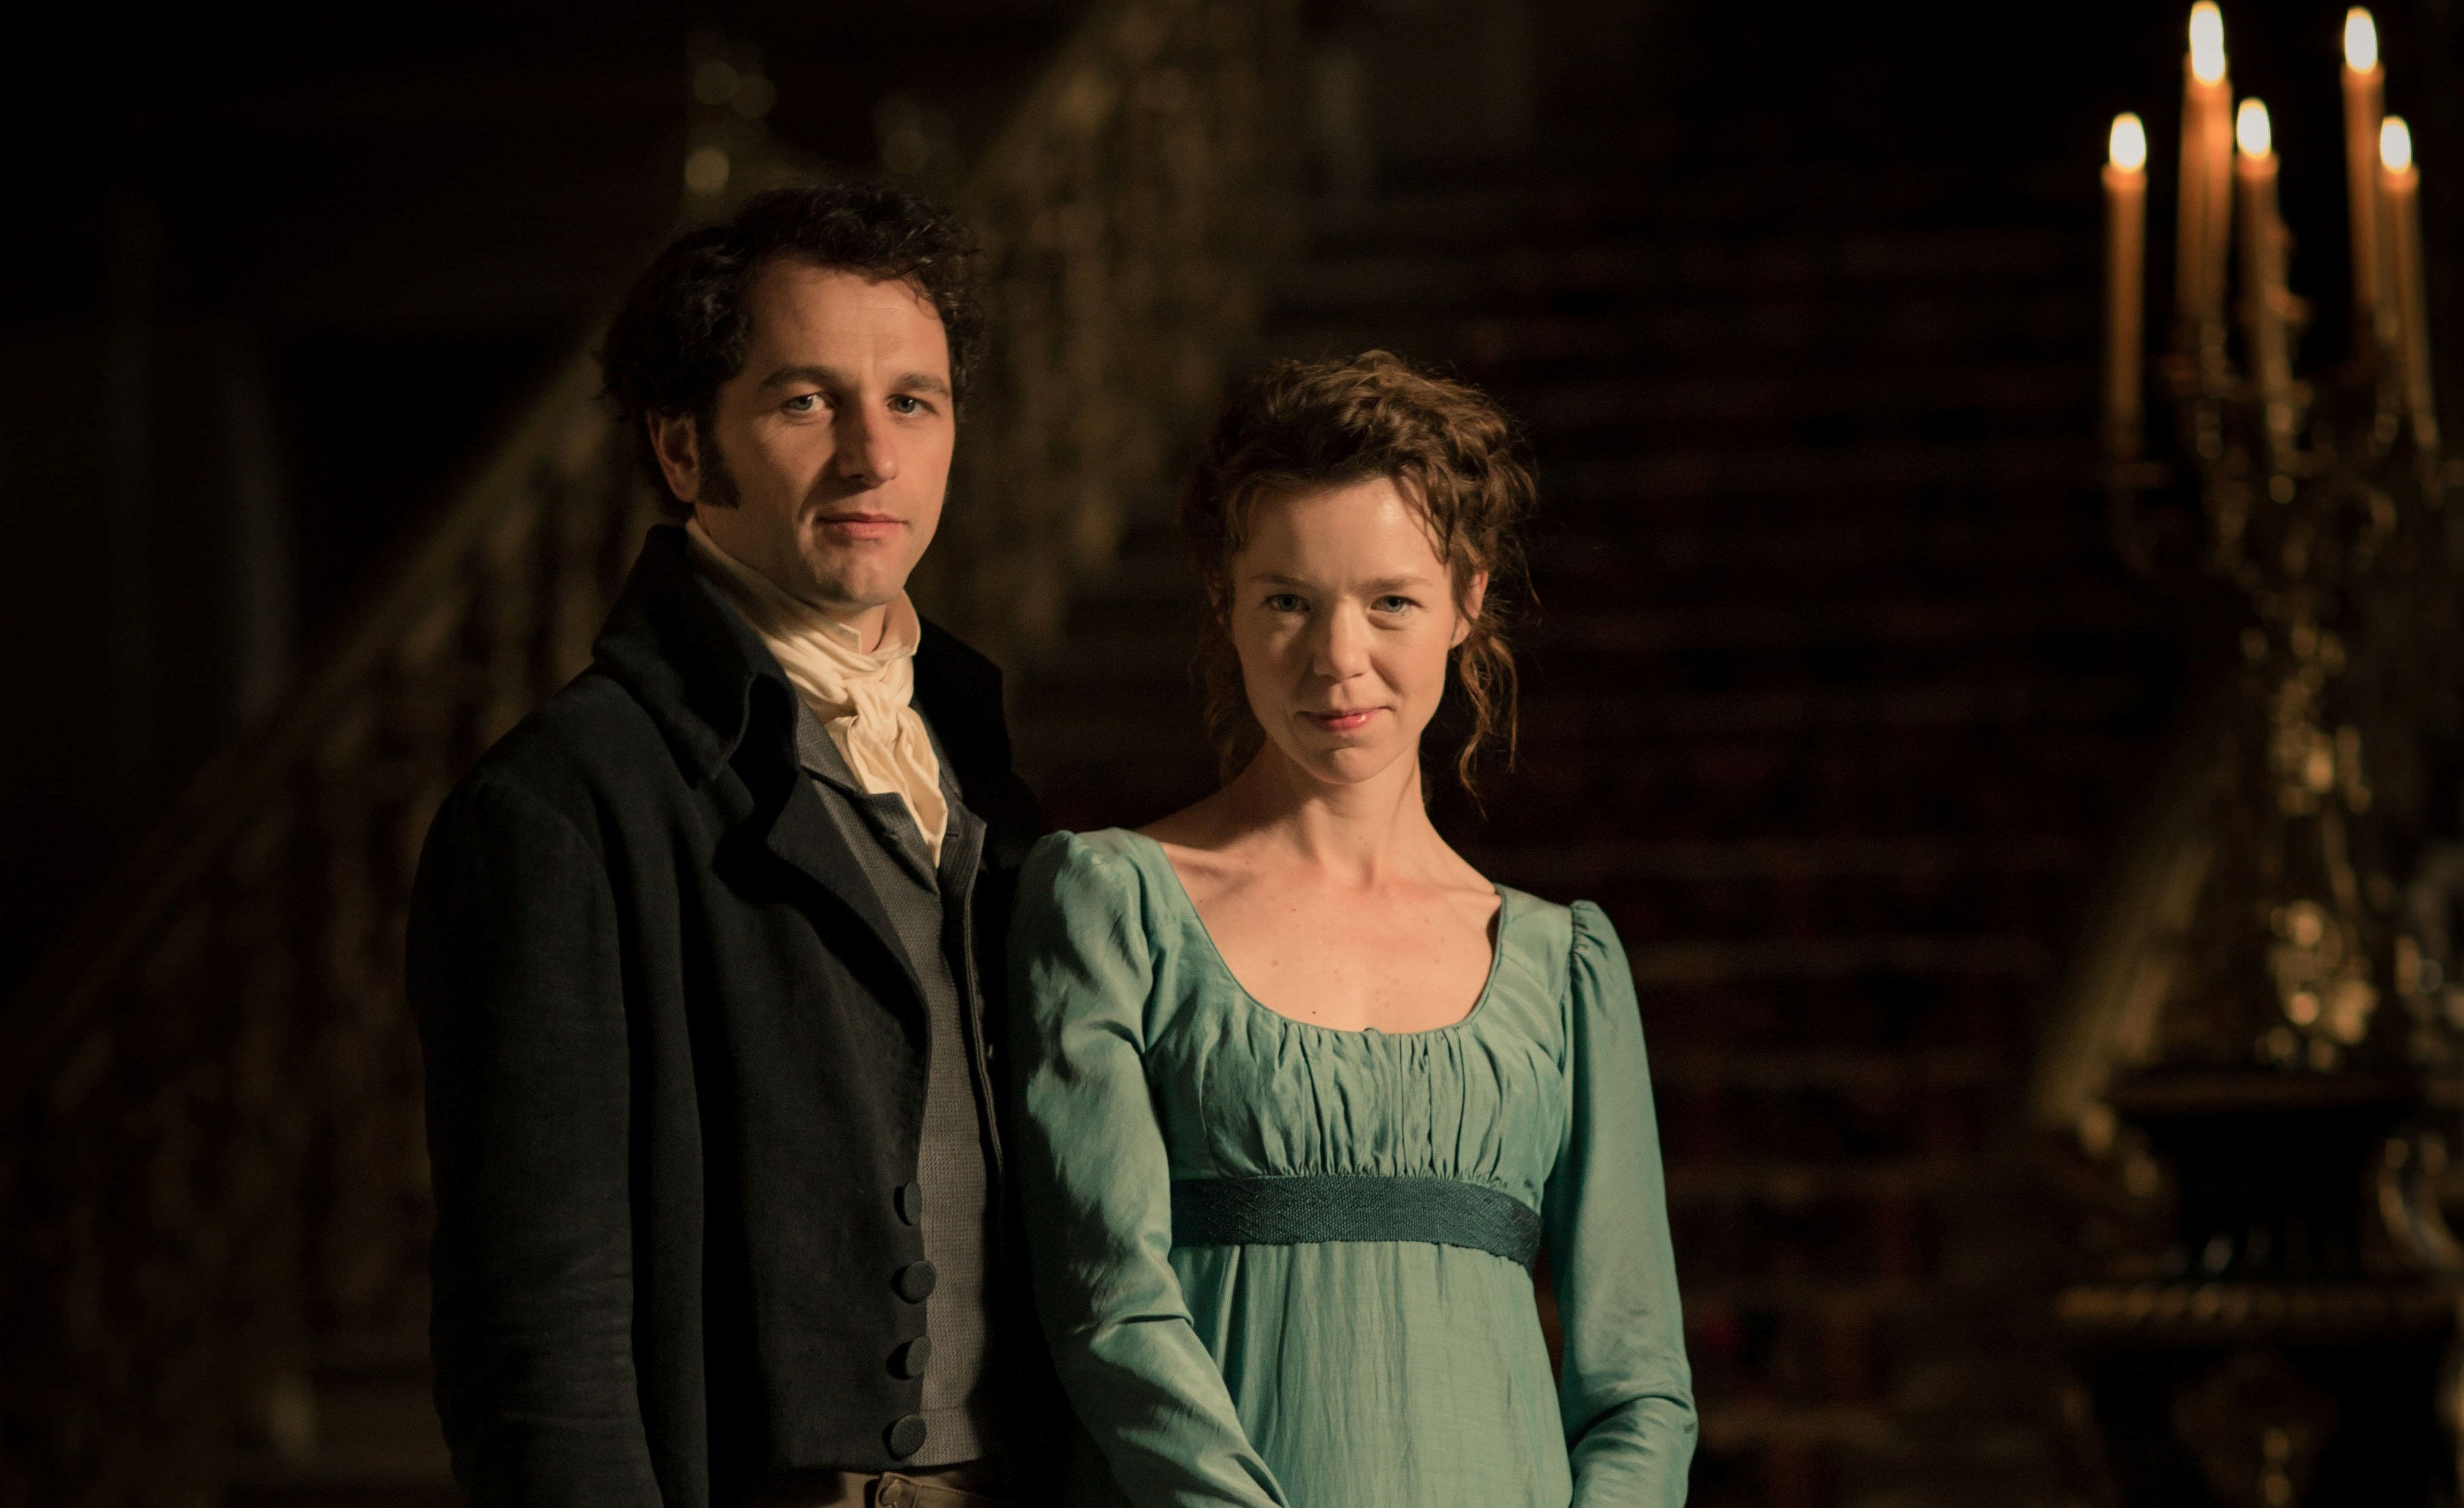 Matthew Rhys and Anna Maxwell Martin as Lizzie and Darcy. (Photo: Robert Viglasky/Origin Pictures 2013 for MASTERPIECE)